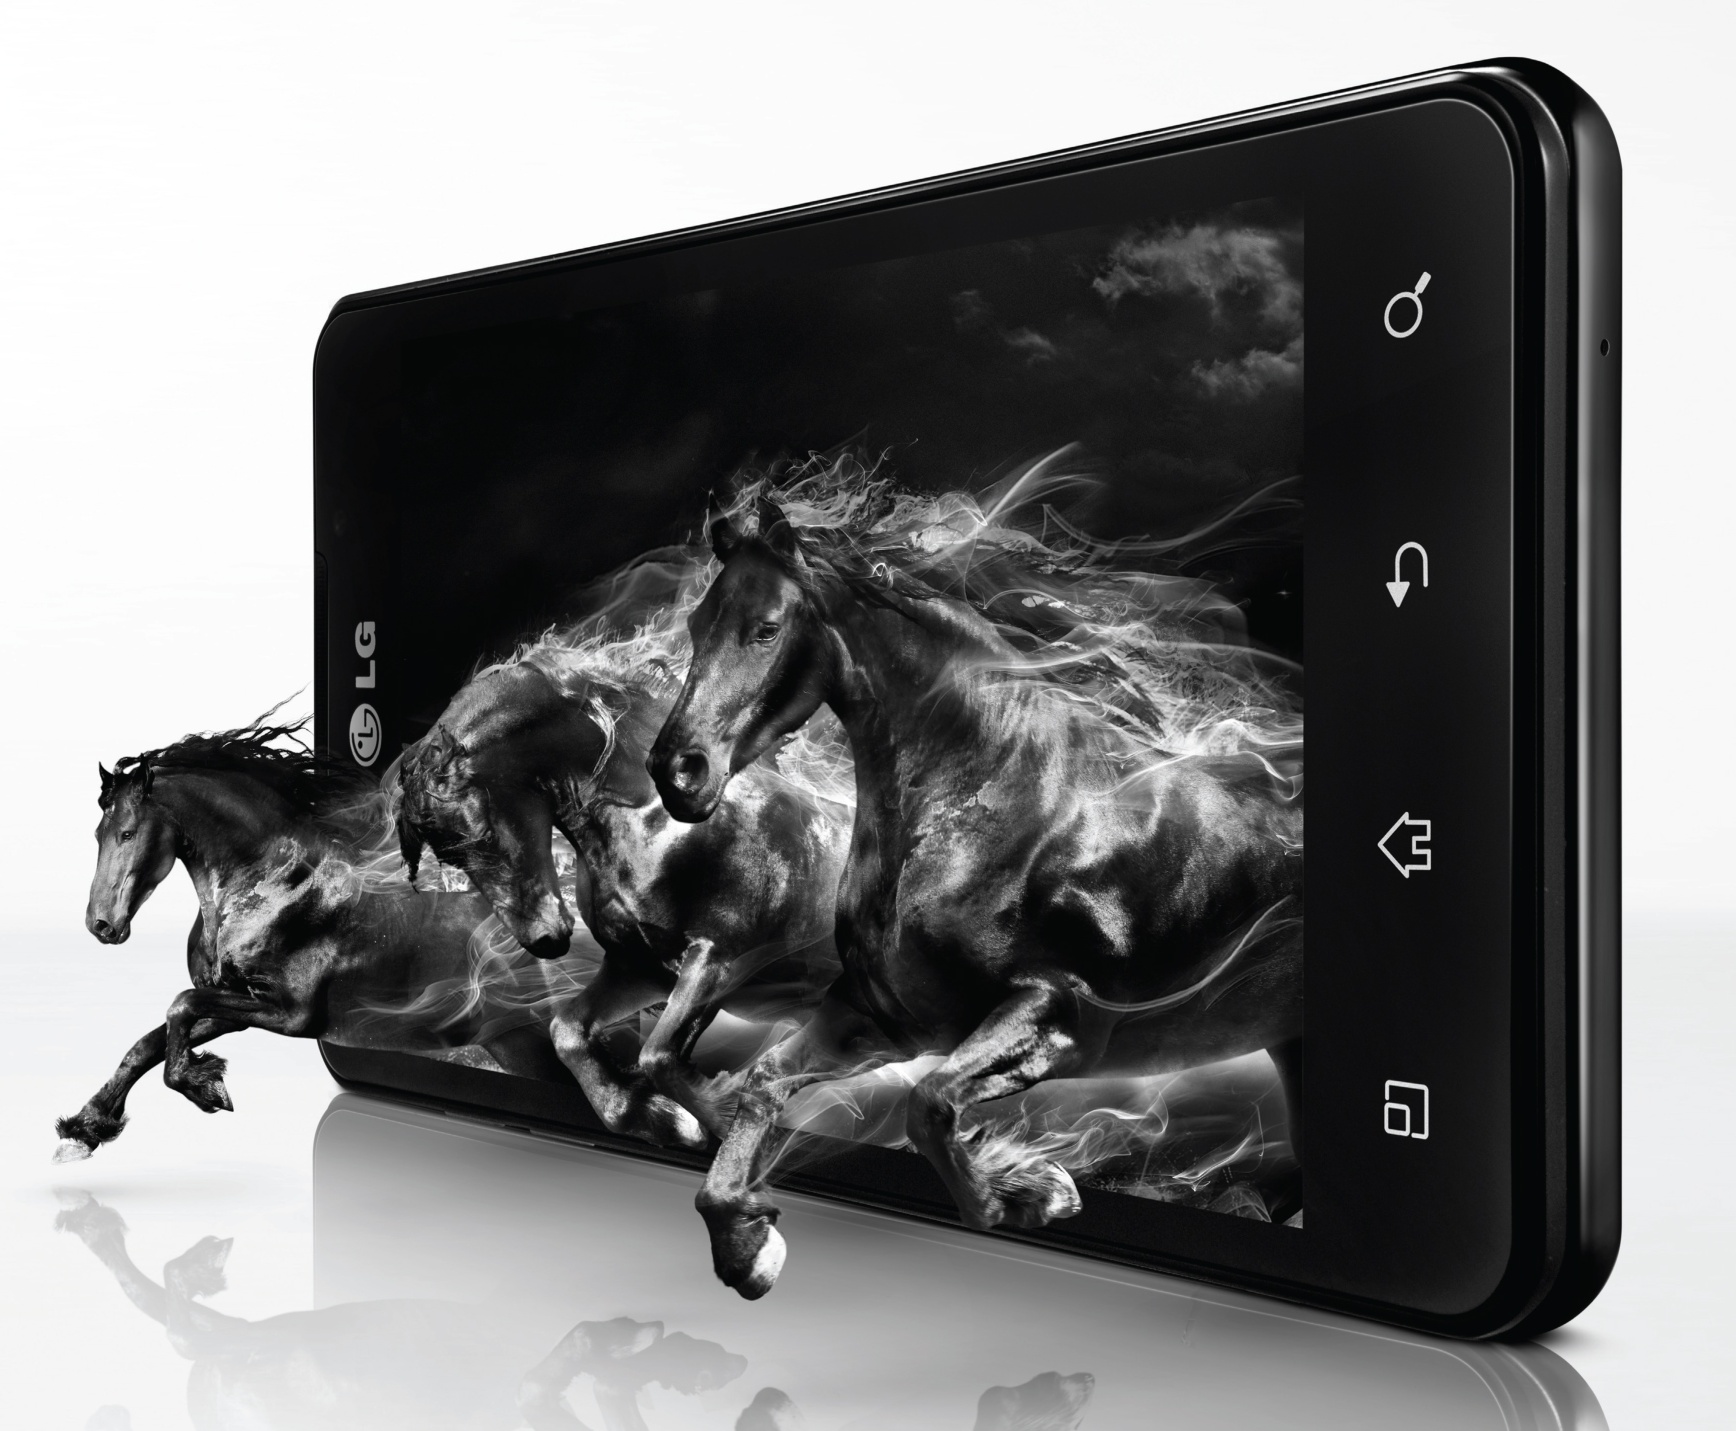 Black horses emerge from the LG Optimus 3D Max’s display